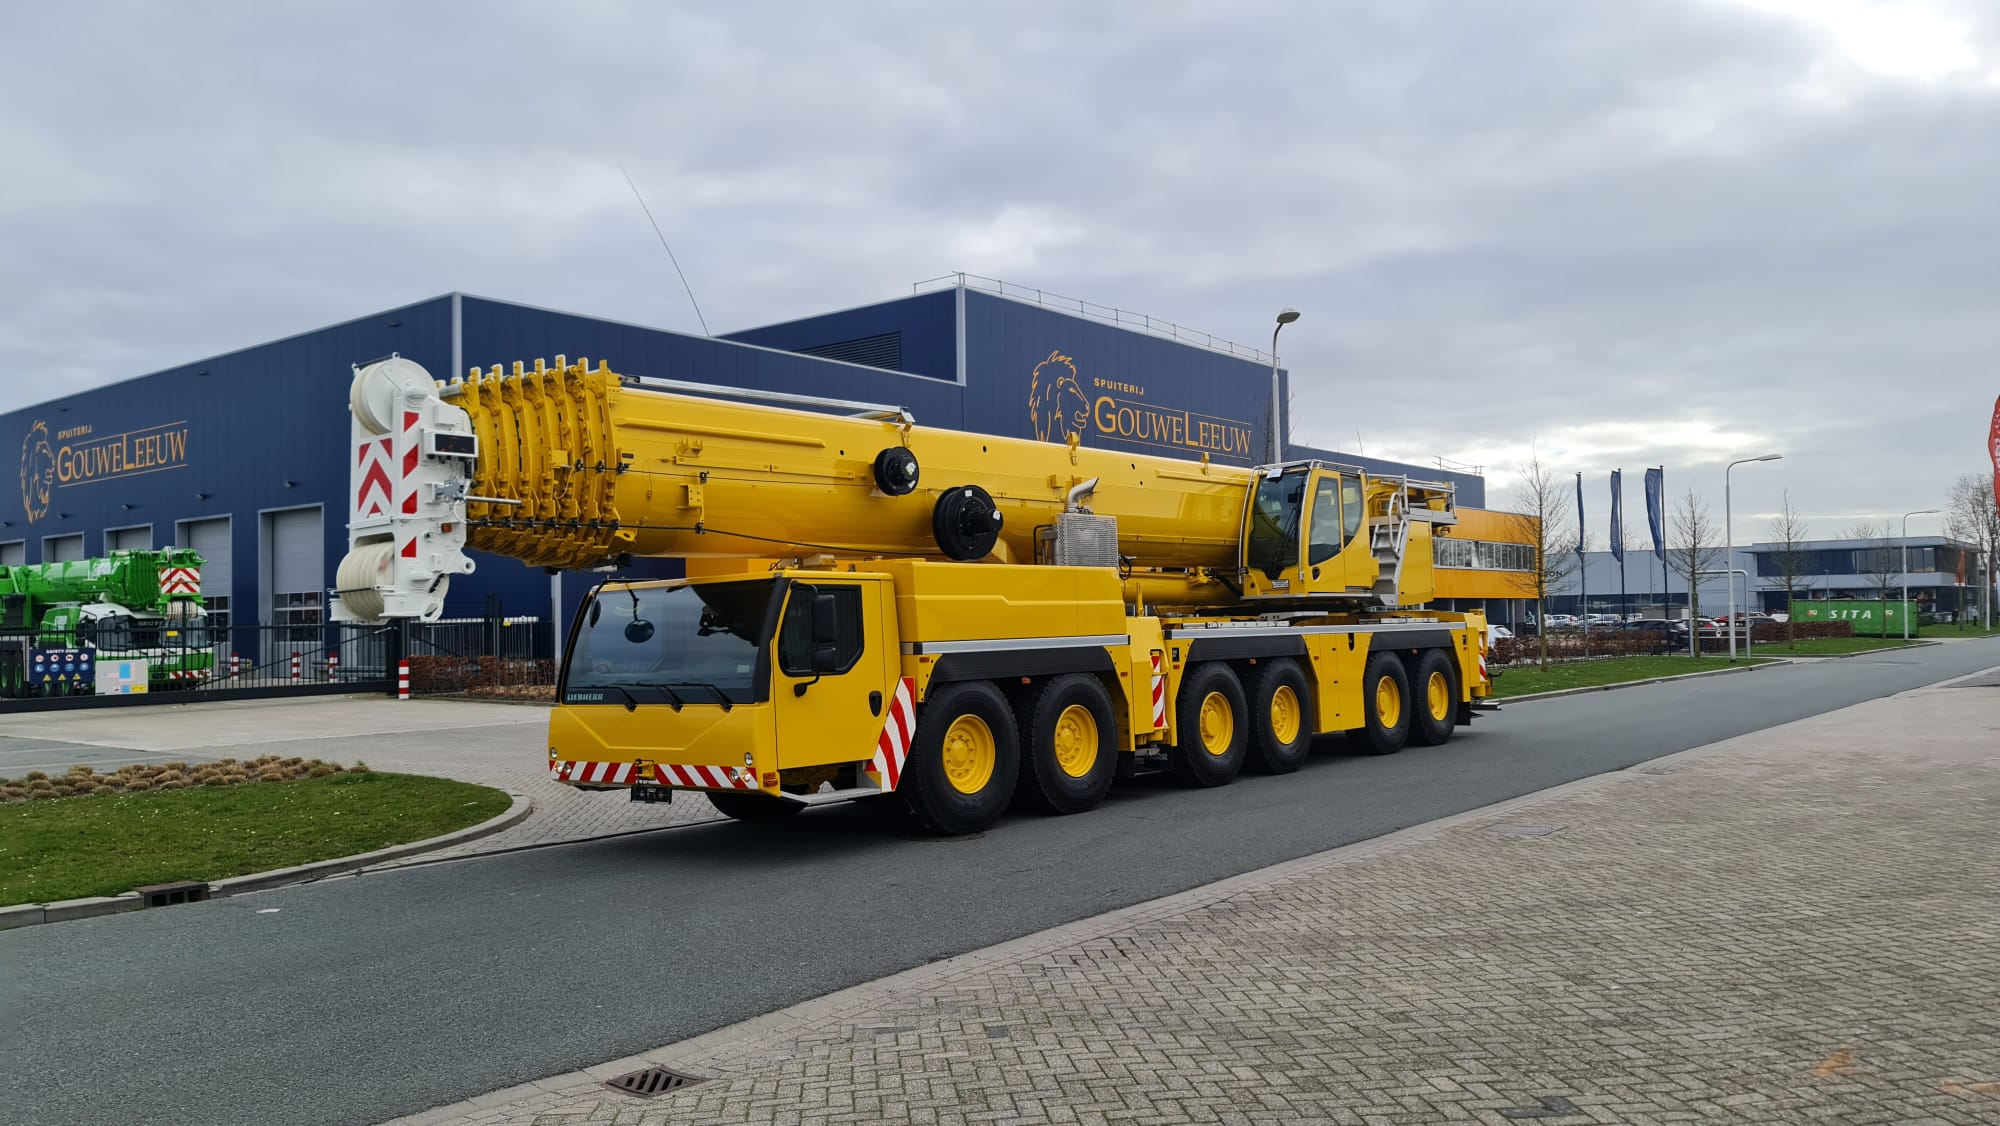 Request a quote without obligation for the painting of your telescopic crane